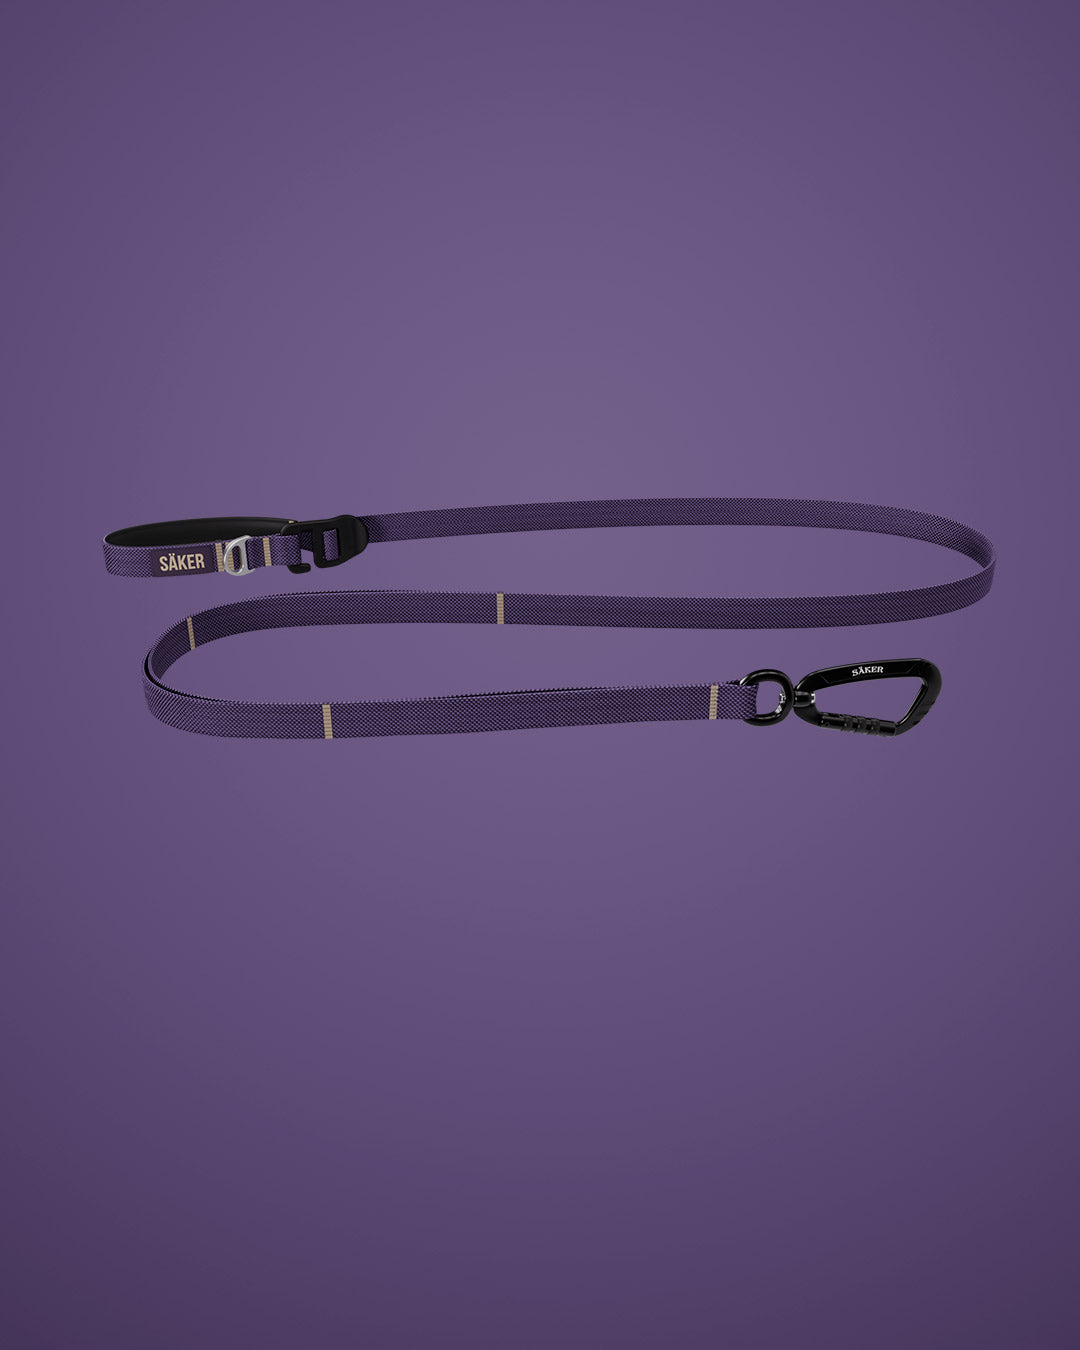 Main view of the canyon leash in prairies purple on purple background